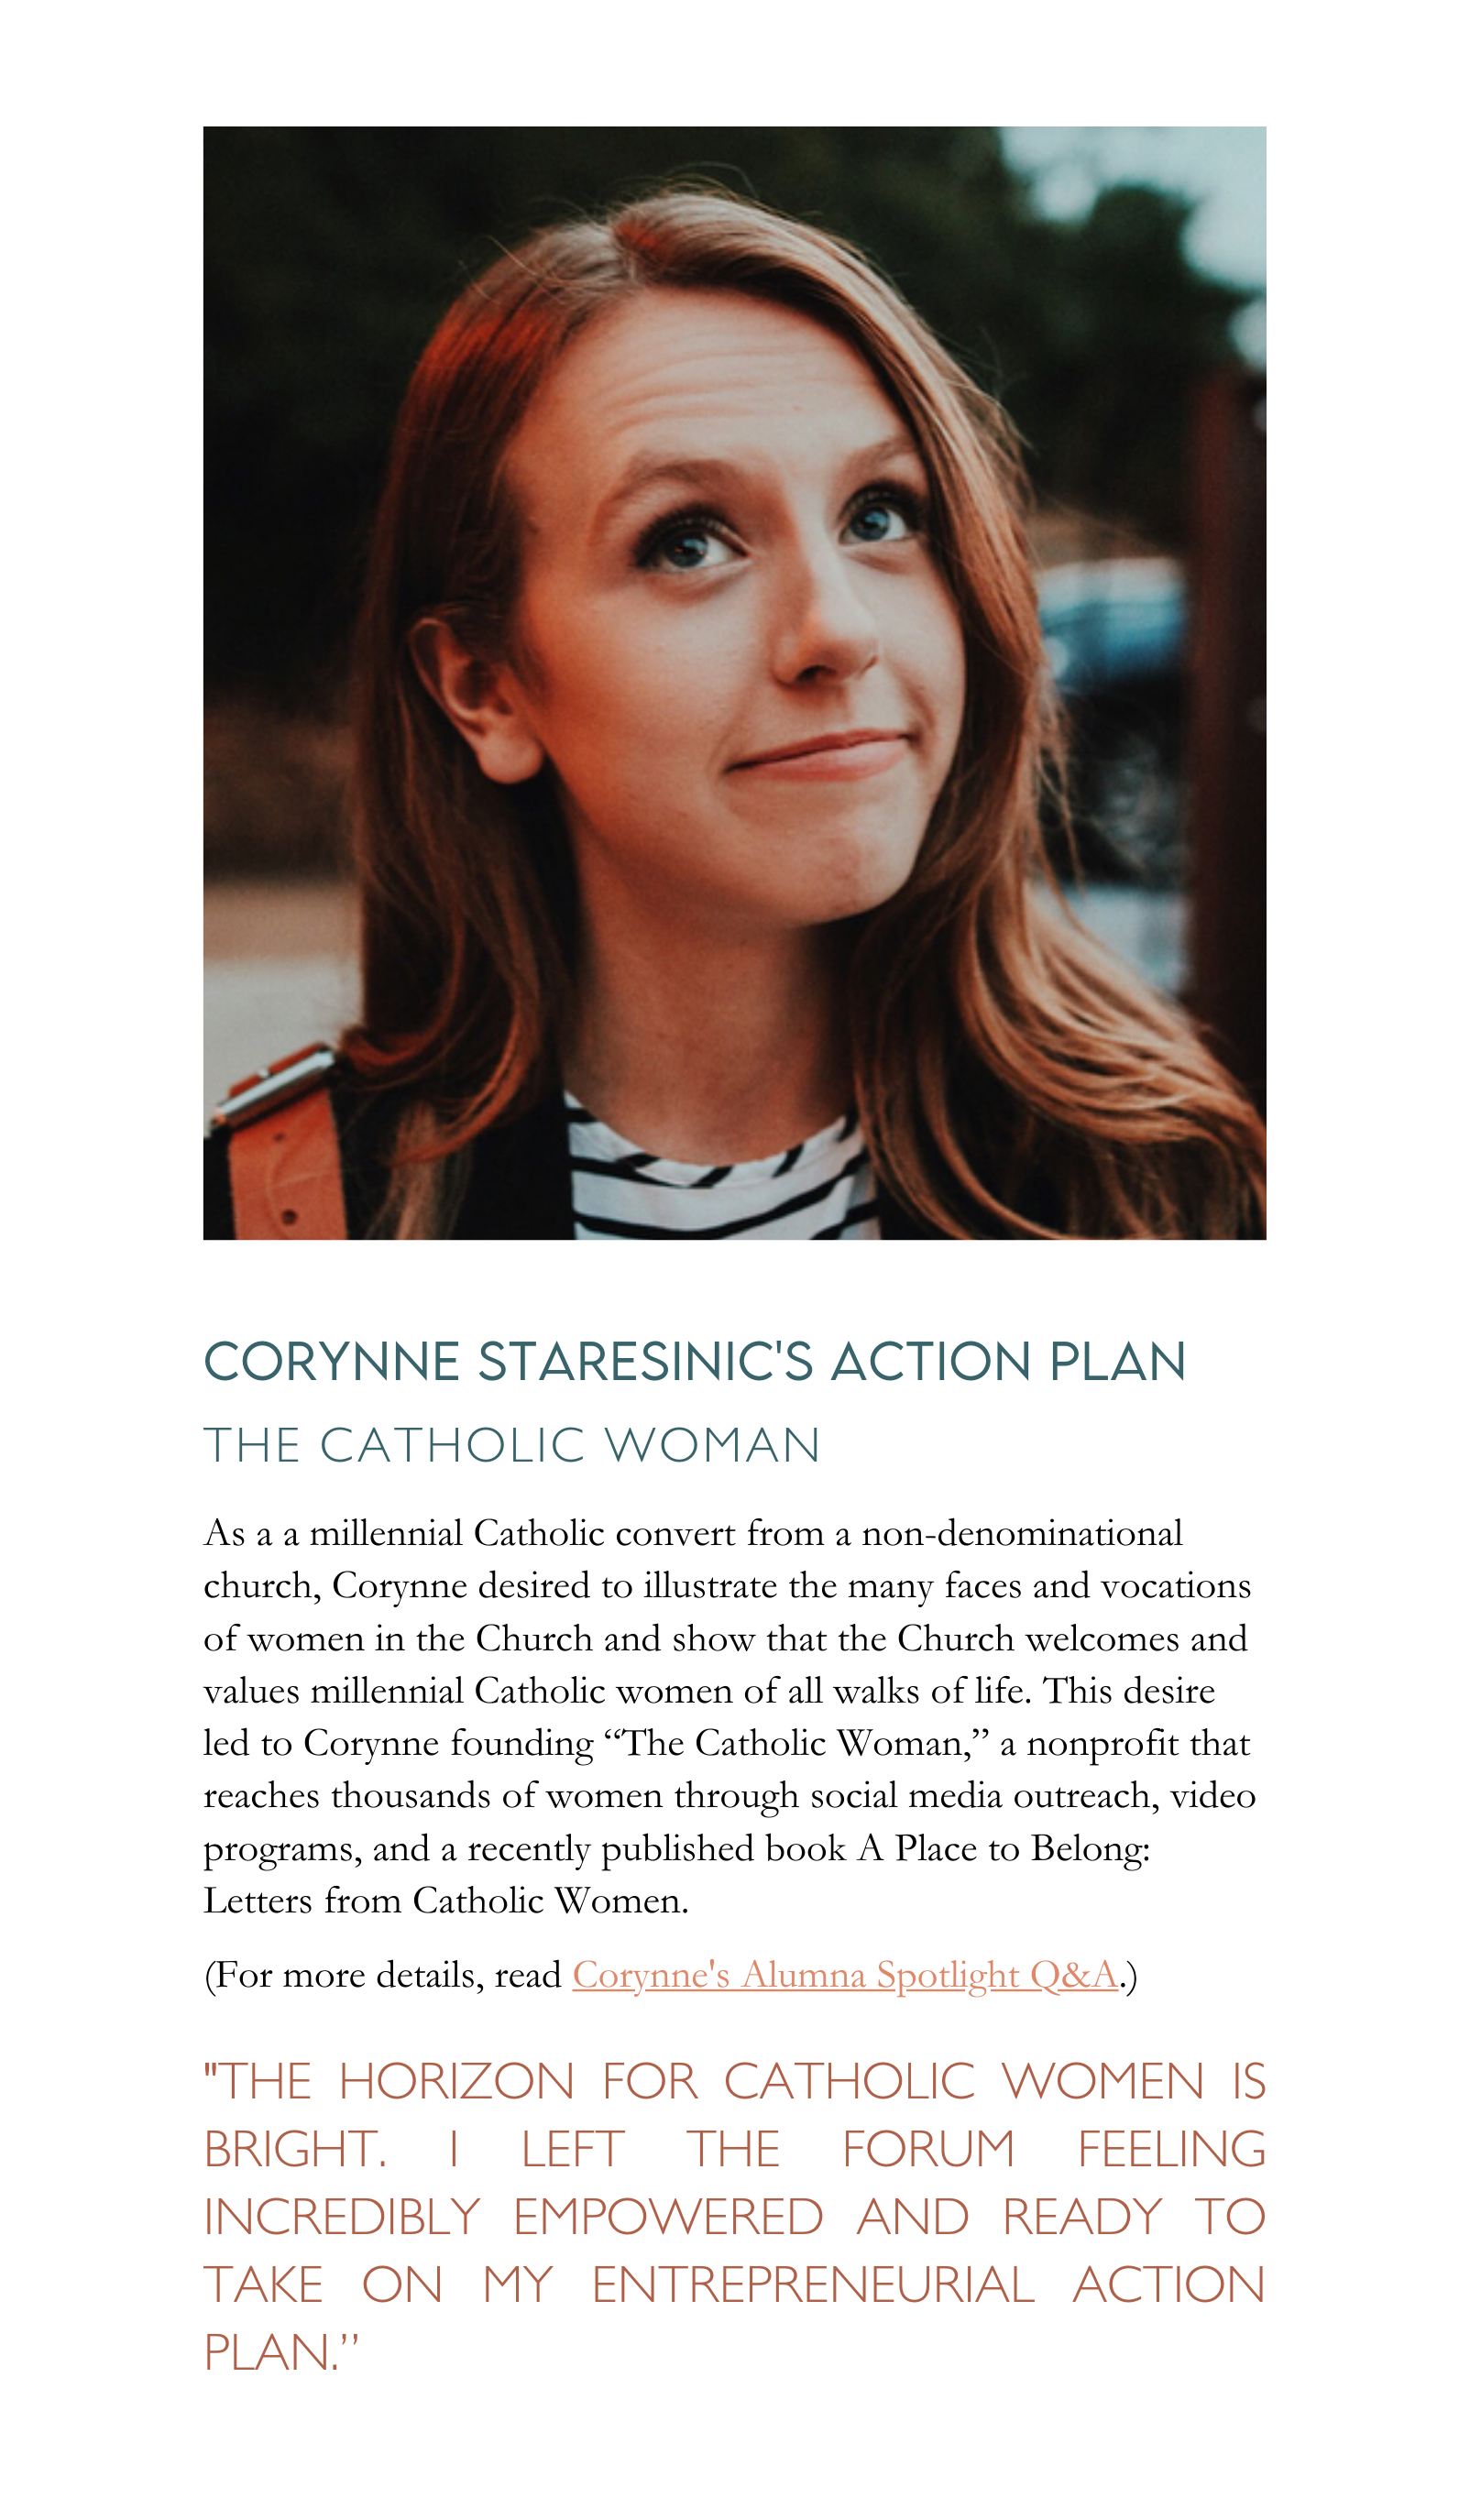 As a a millennial Catholic convert from a non-denominational church, Corynne desired to illustrate the many faces and vocations of women in the Church and show that the Church welcomes and values millennial Catholic women of all walks of life. This desire led to Corynne founding “The Catholic Woman,” a nonprofit that reaches thousands of women through social media outreach, video programs, and a recently published book A Place to Belong: Letters from Catholic Women.